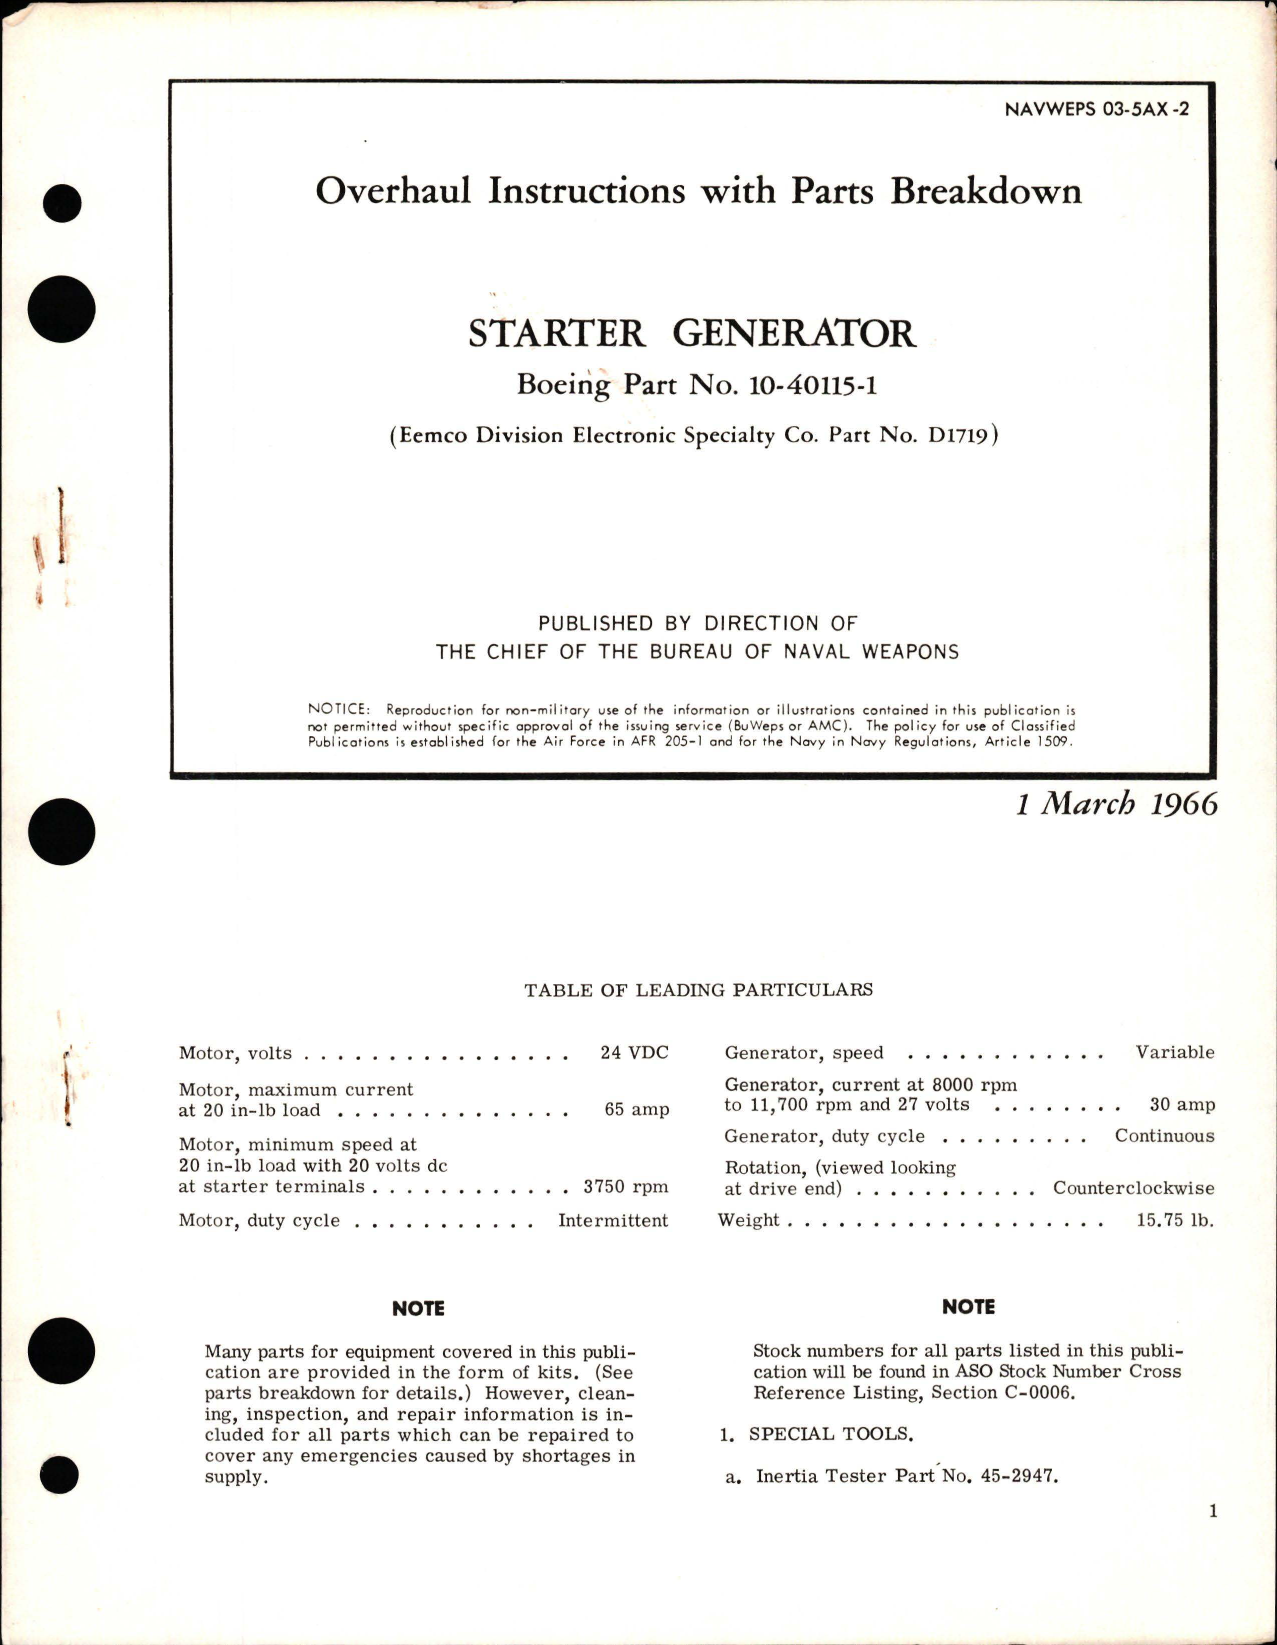 Sample page 1 from AirCorps Library document: Overhaul Instructions with Parts Breakdown for Starter Generator - Part 10-40115-1